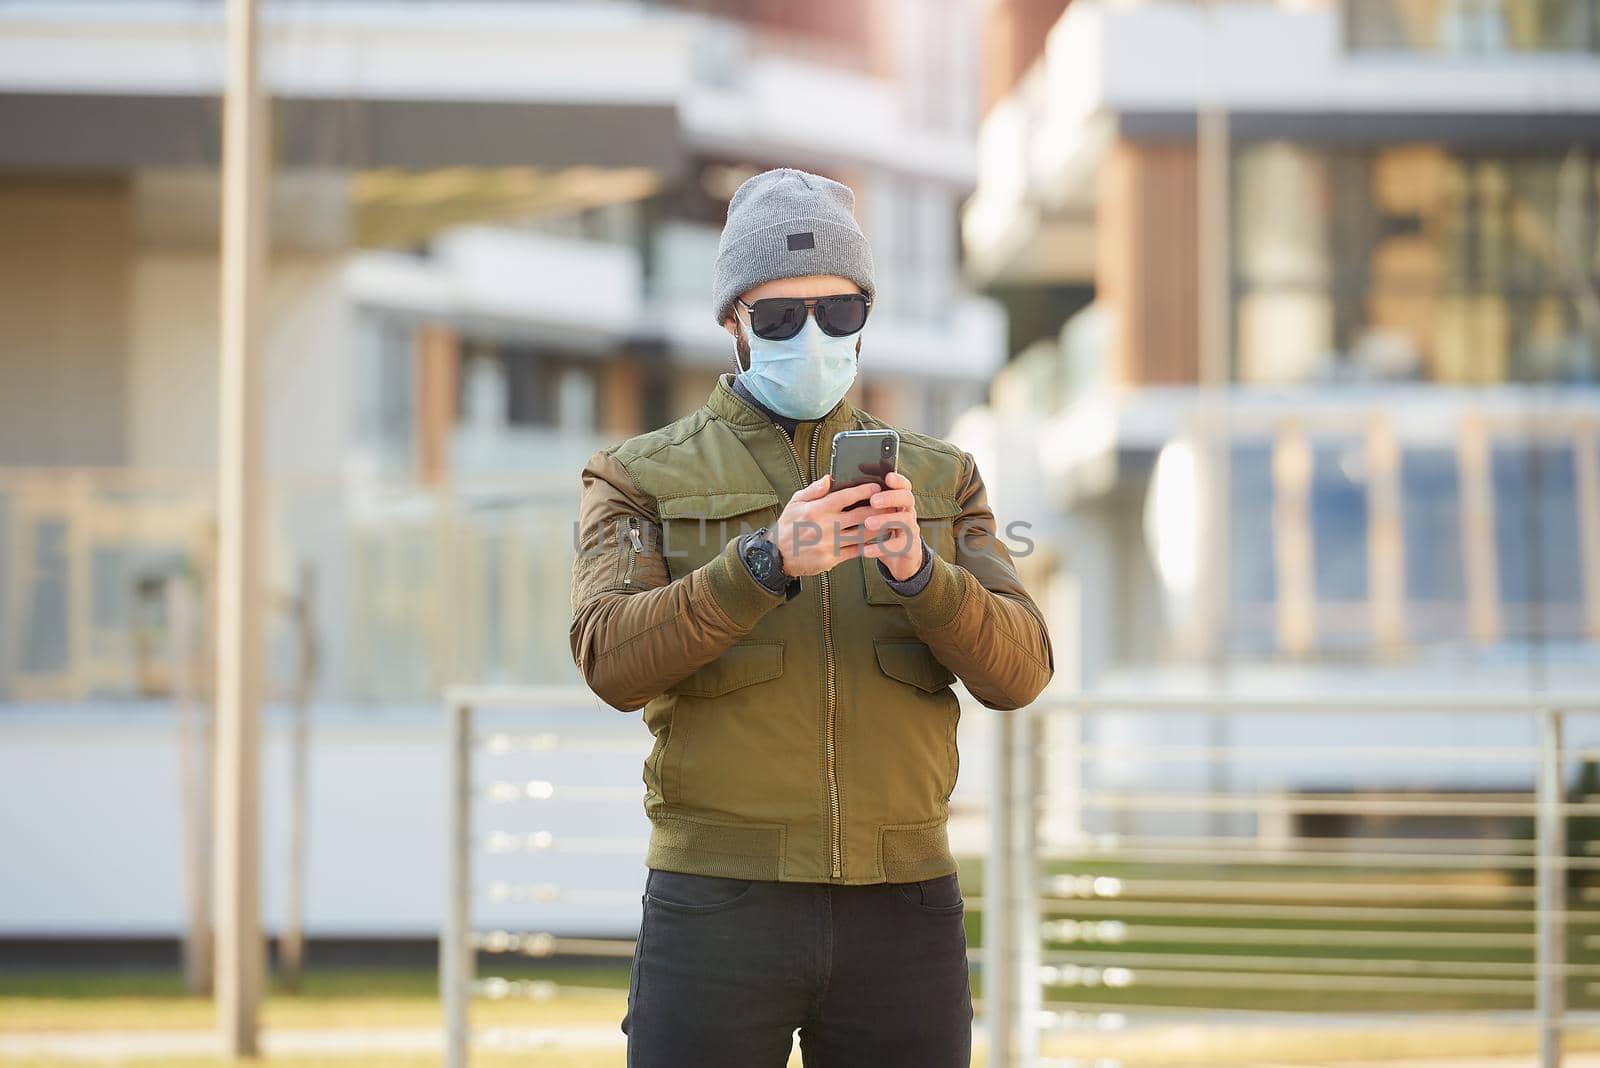 A man in a medical face mask to avoid the spread coronavirus waiting in the cozy street. A fellow checking sunglasses wears a cap and a face mask against COVID 19.